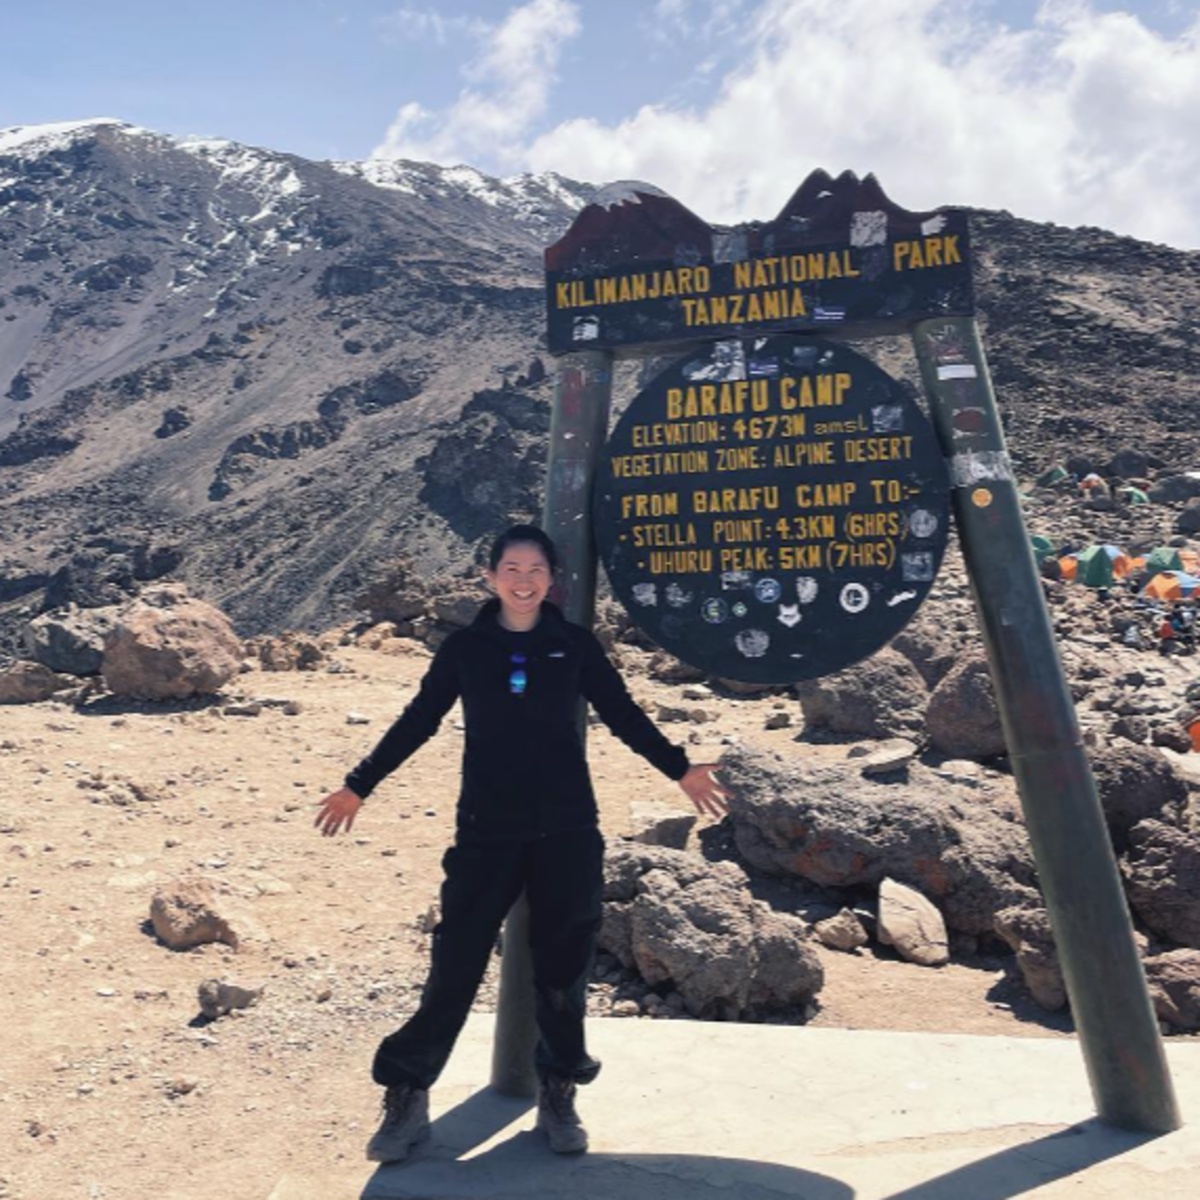 Woman standing next to Barafu Camp sign on Kilimanjaro, August 2022